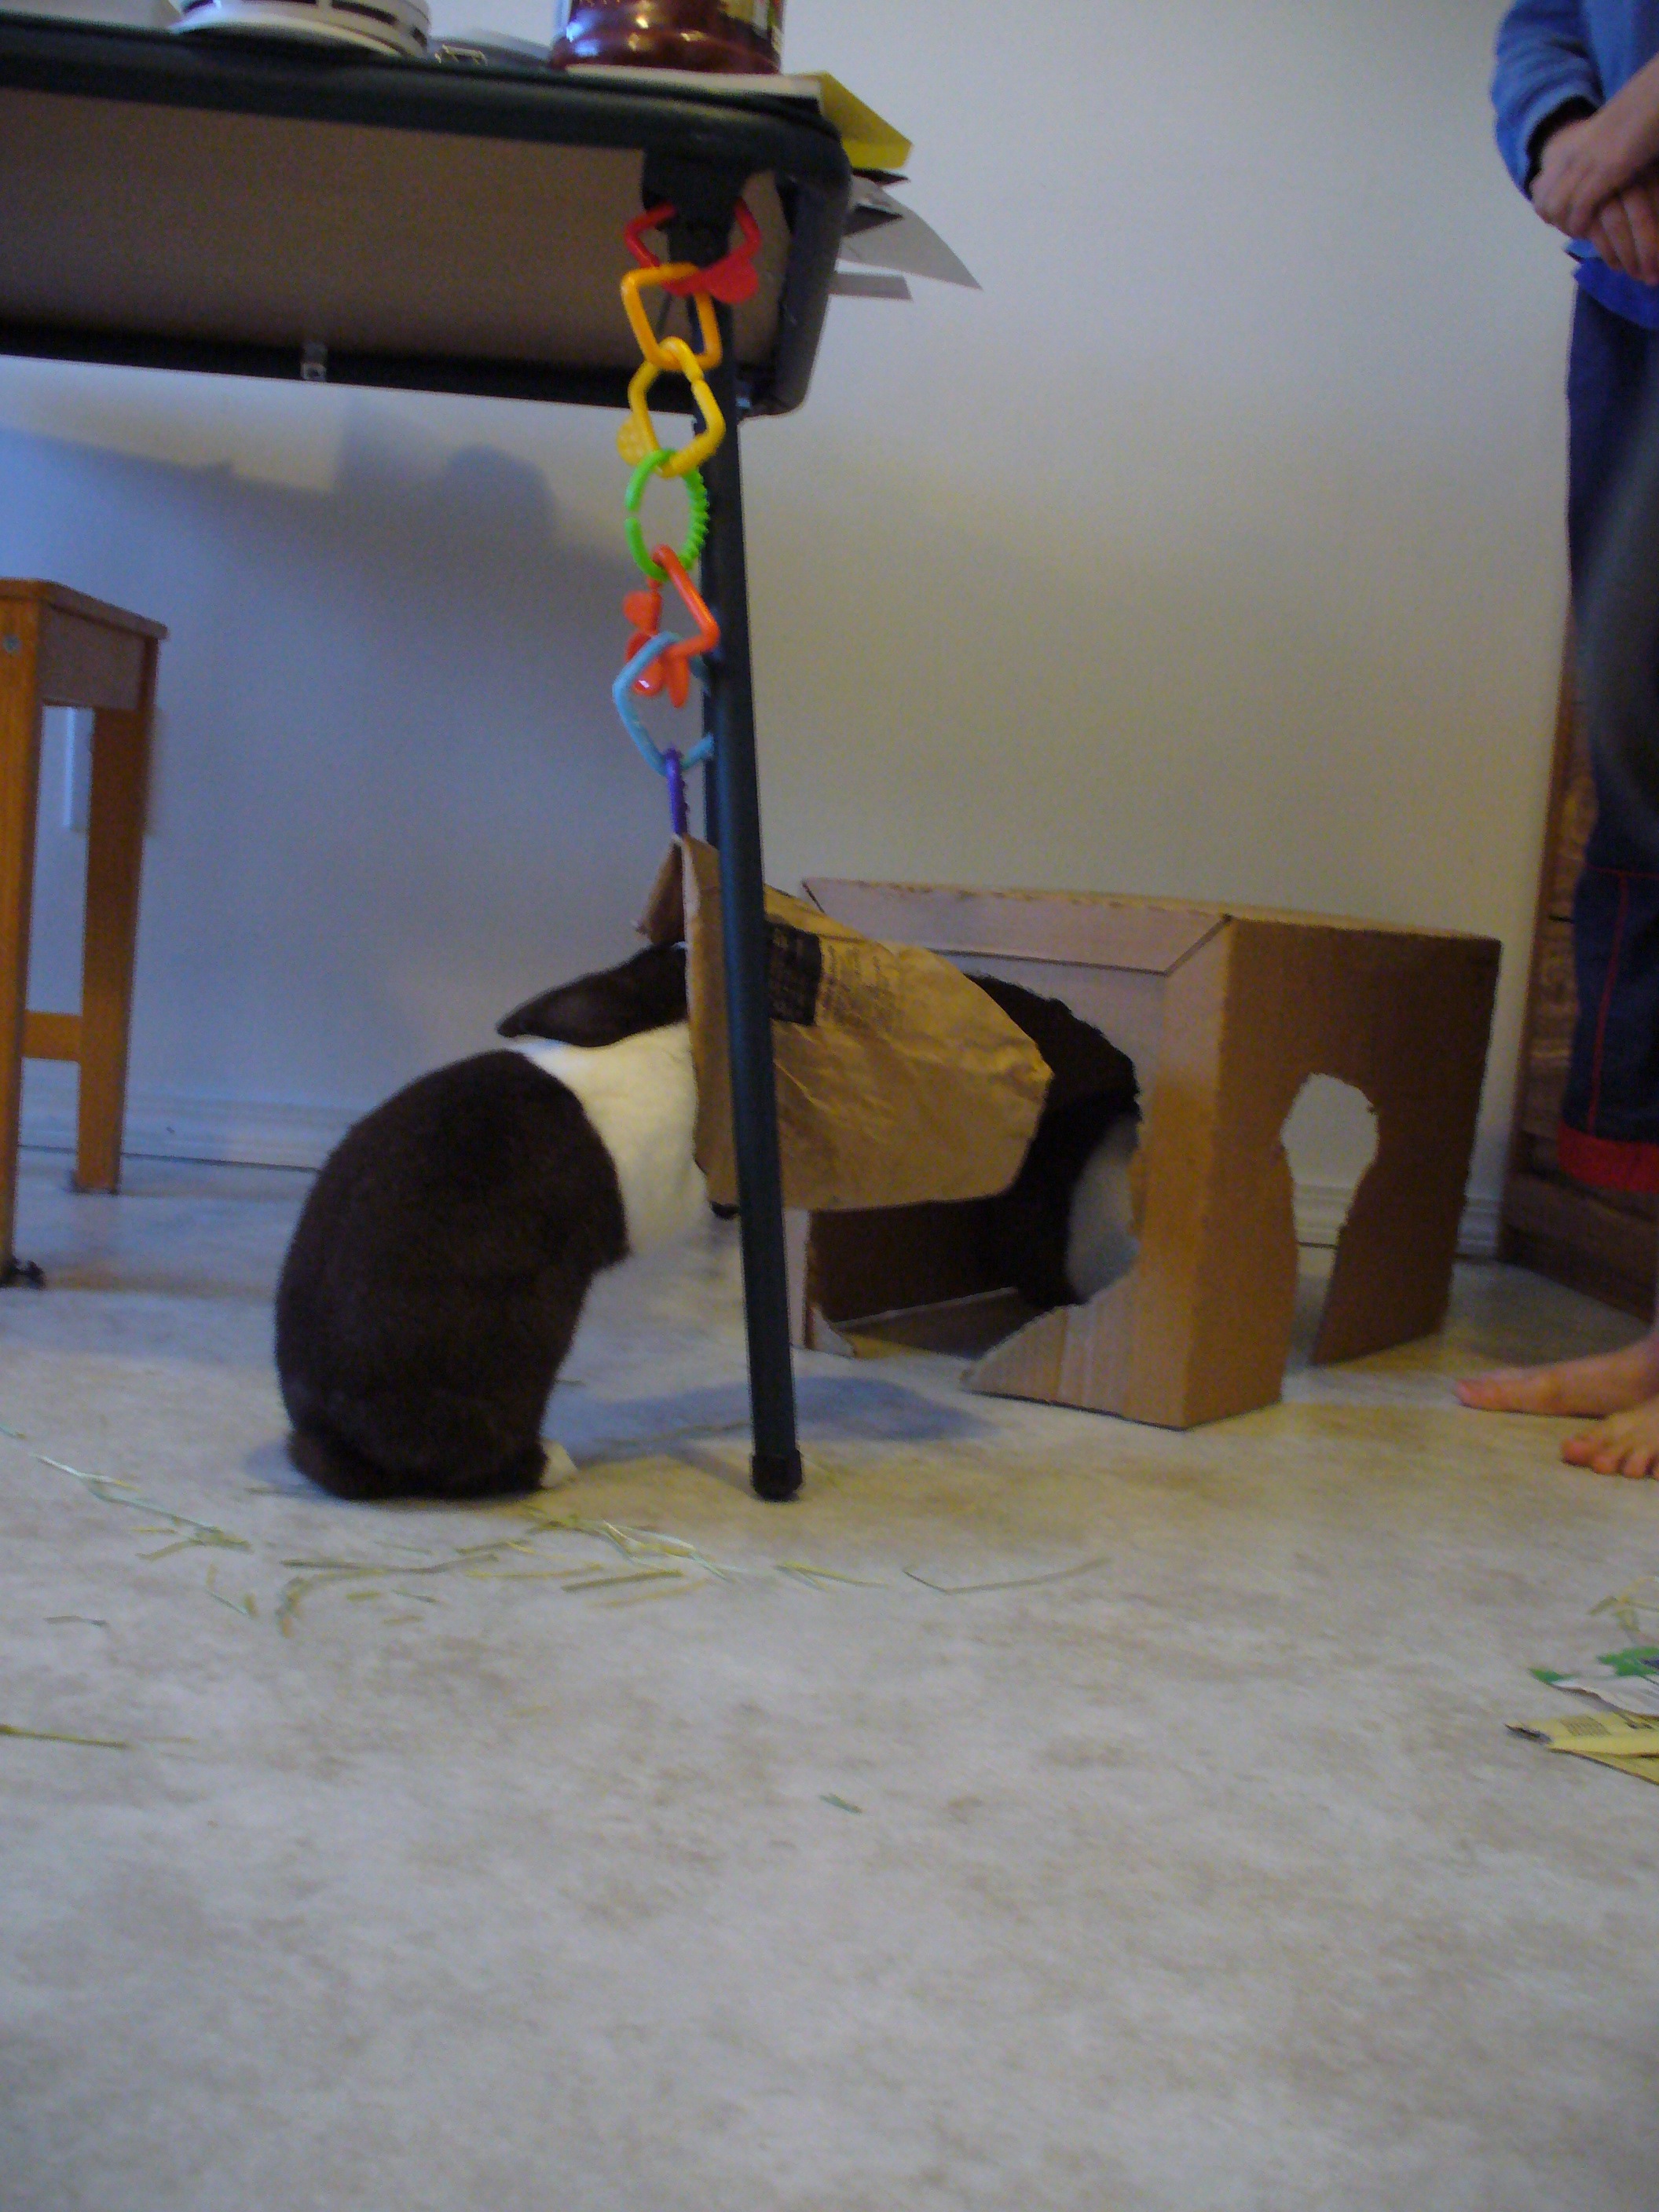 Does That Bag Need a Hay Refill, Bunny? 1